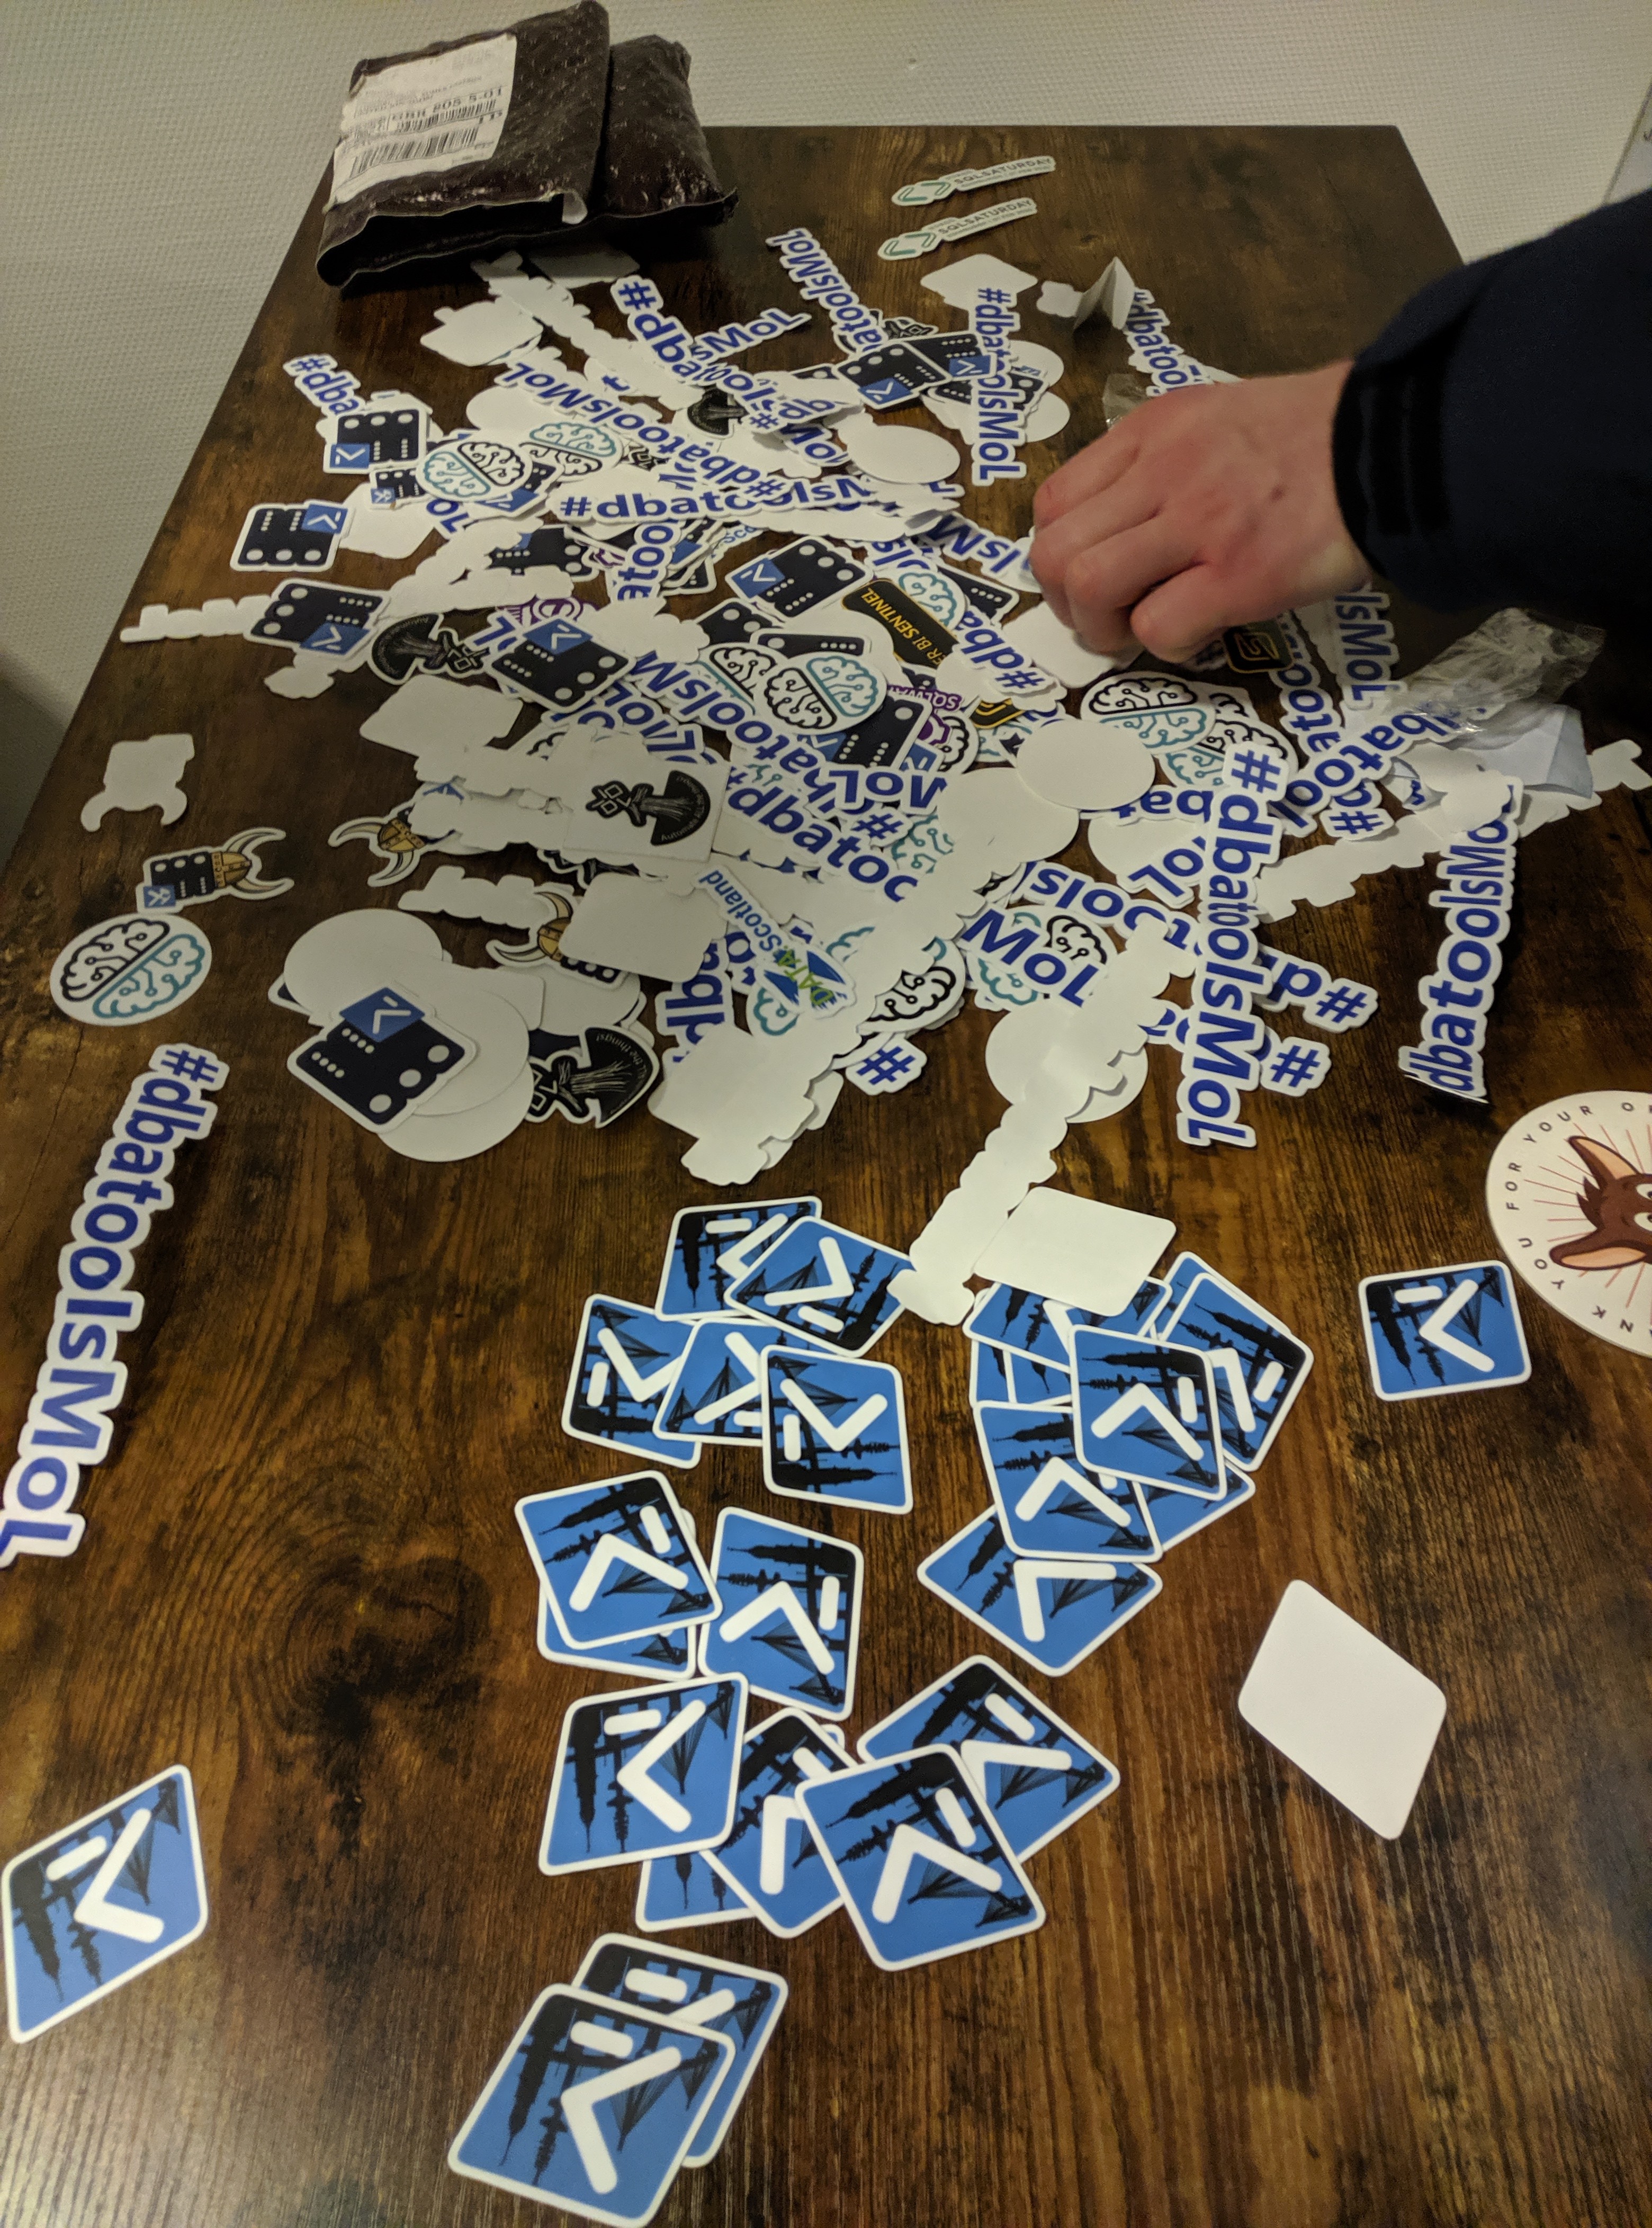 Table full of Stickers